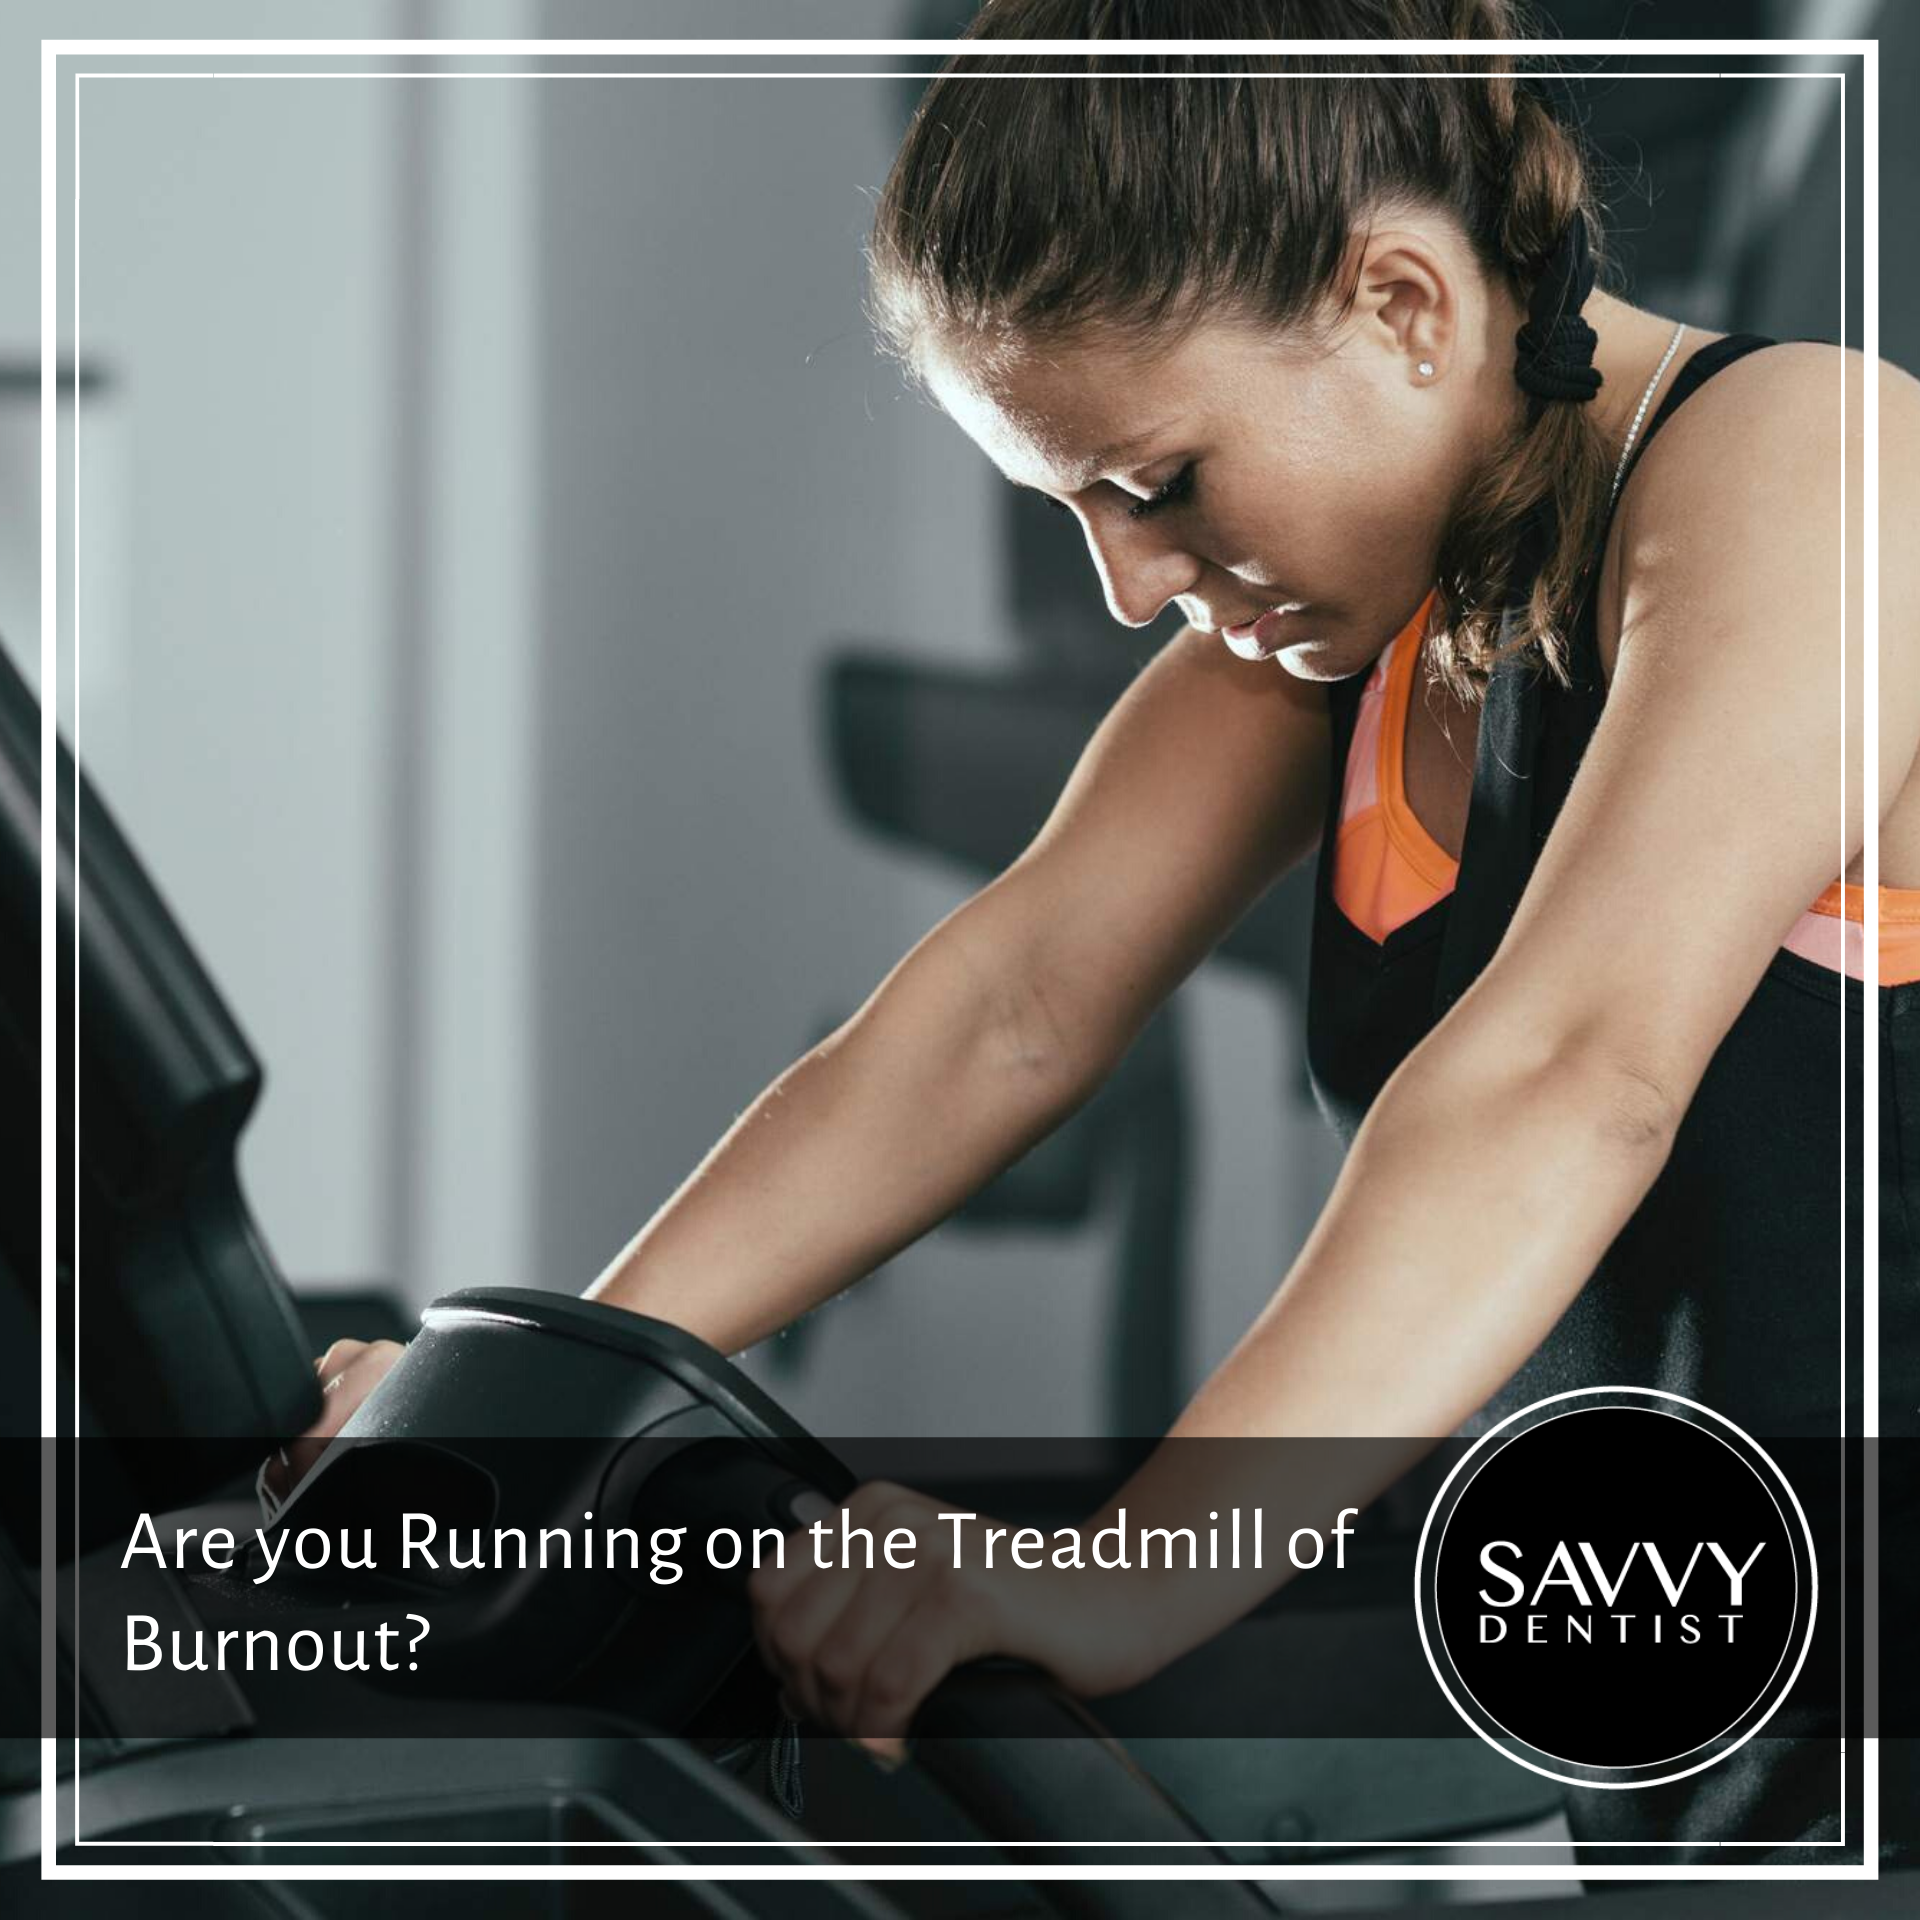 Are You Running on the Treadmill of Burnout?